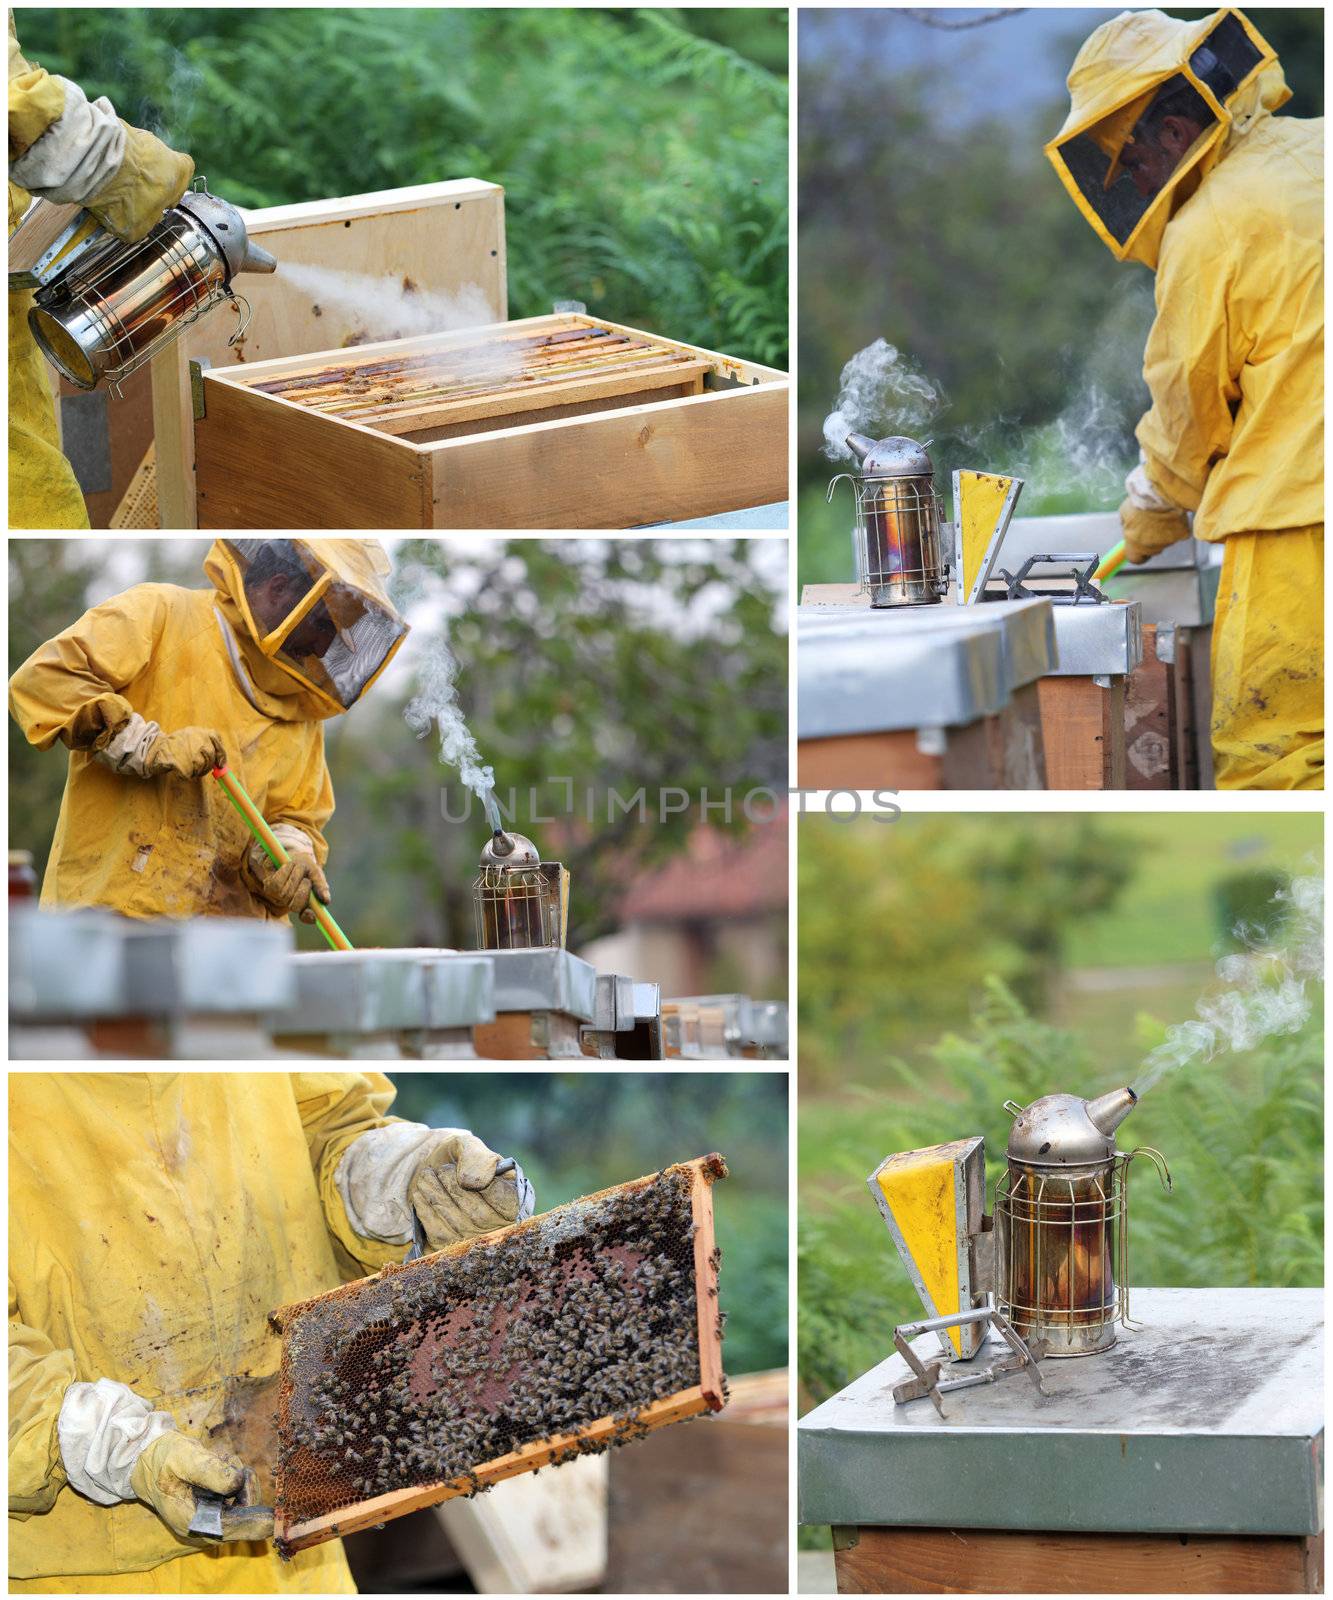 Beekeeping collage by captblack76